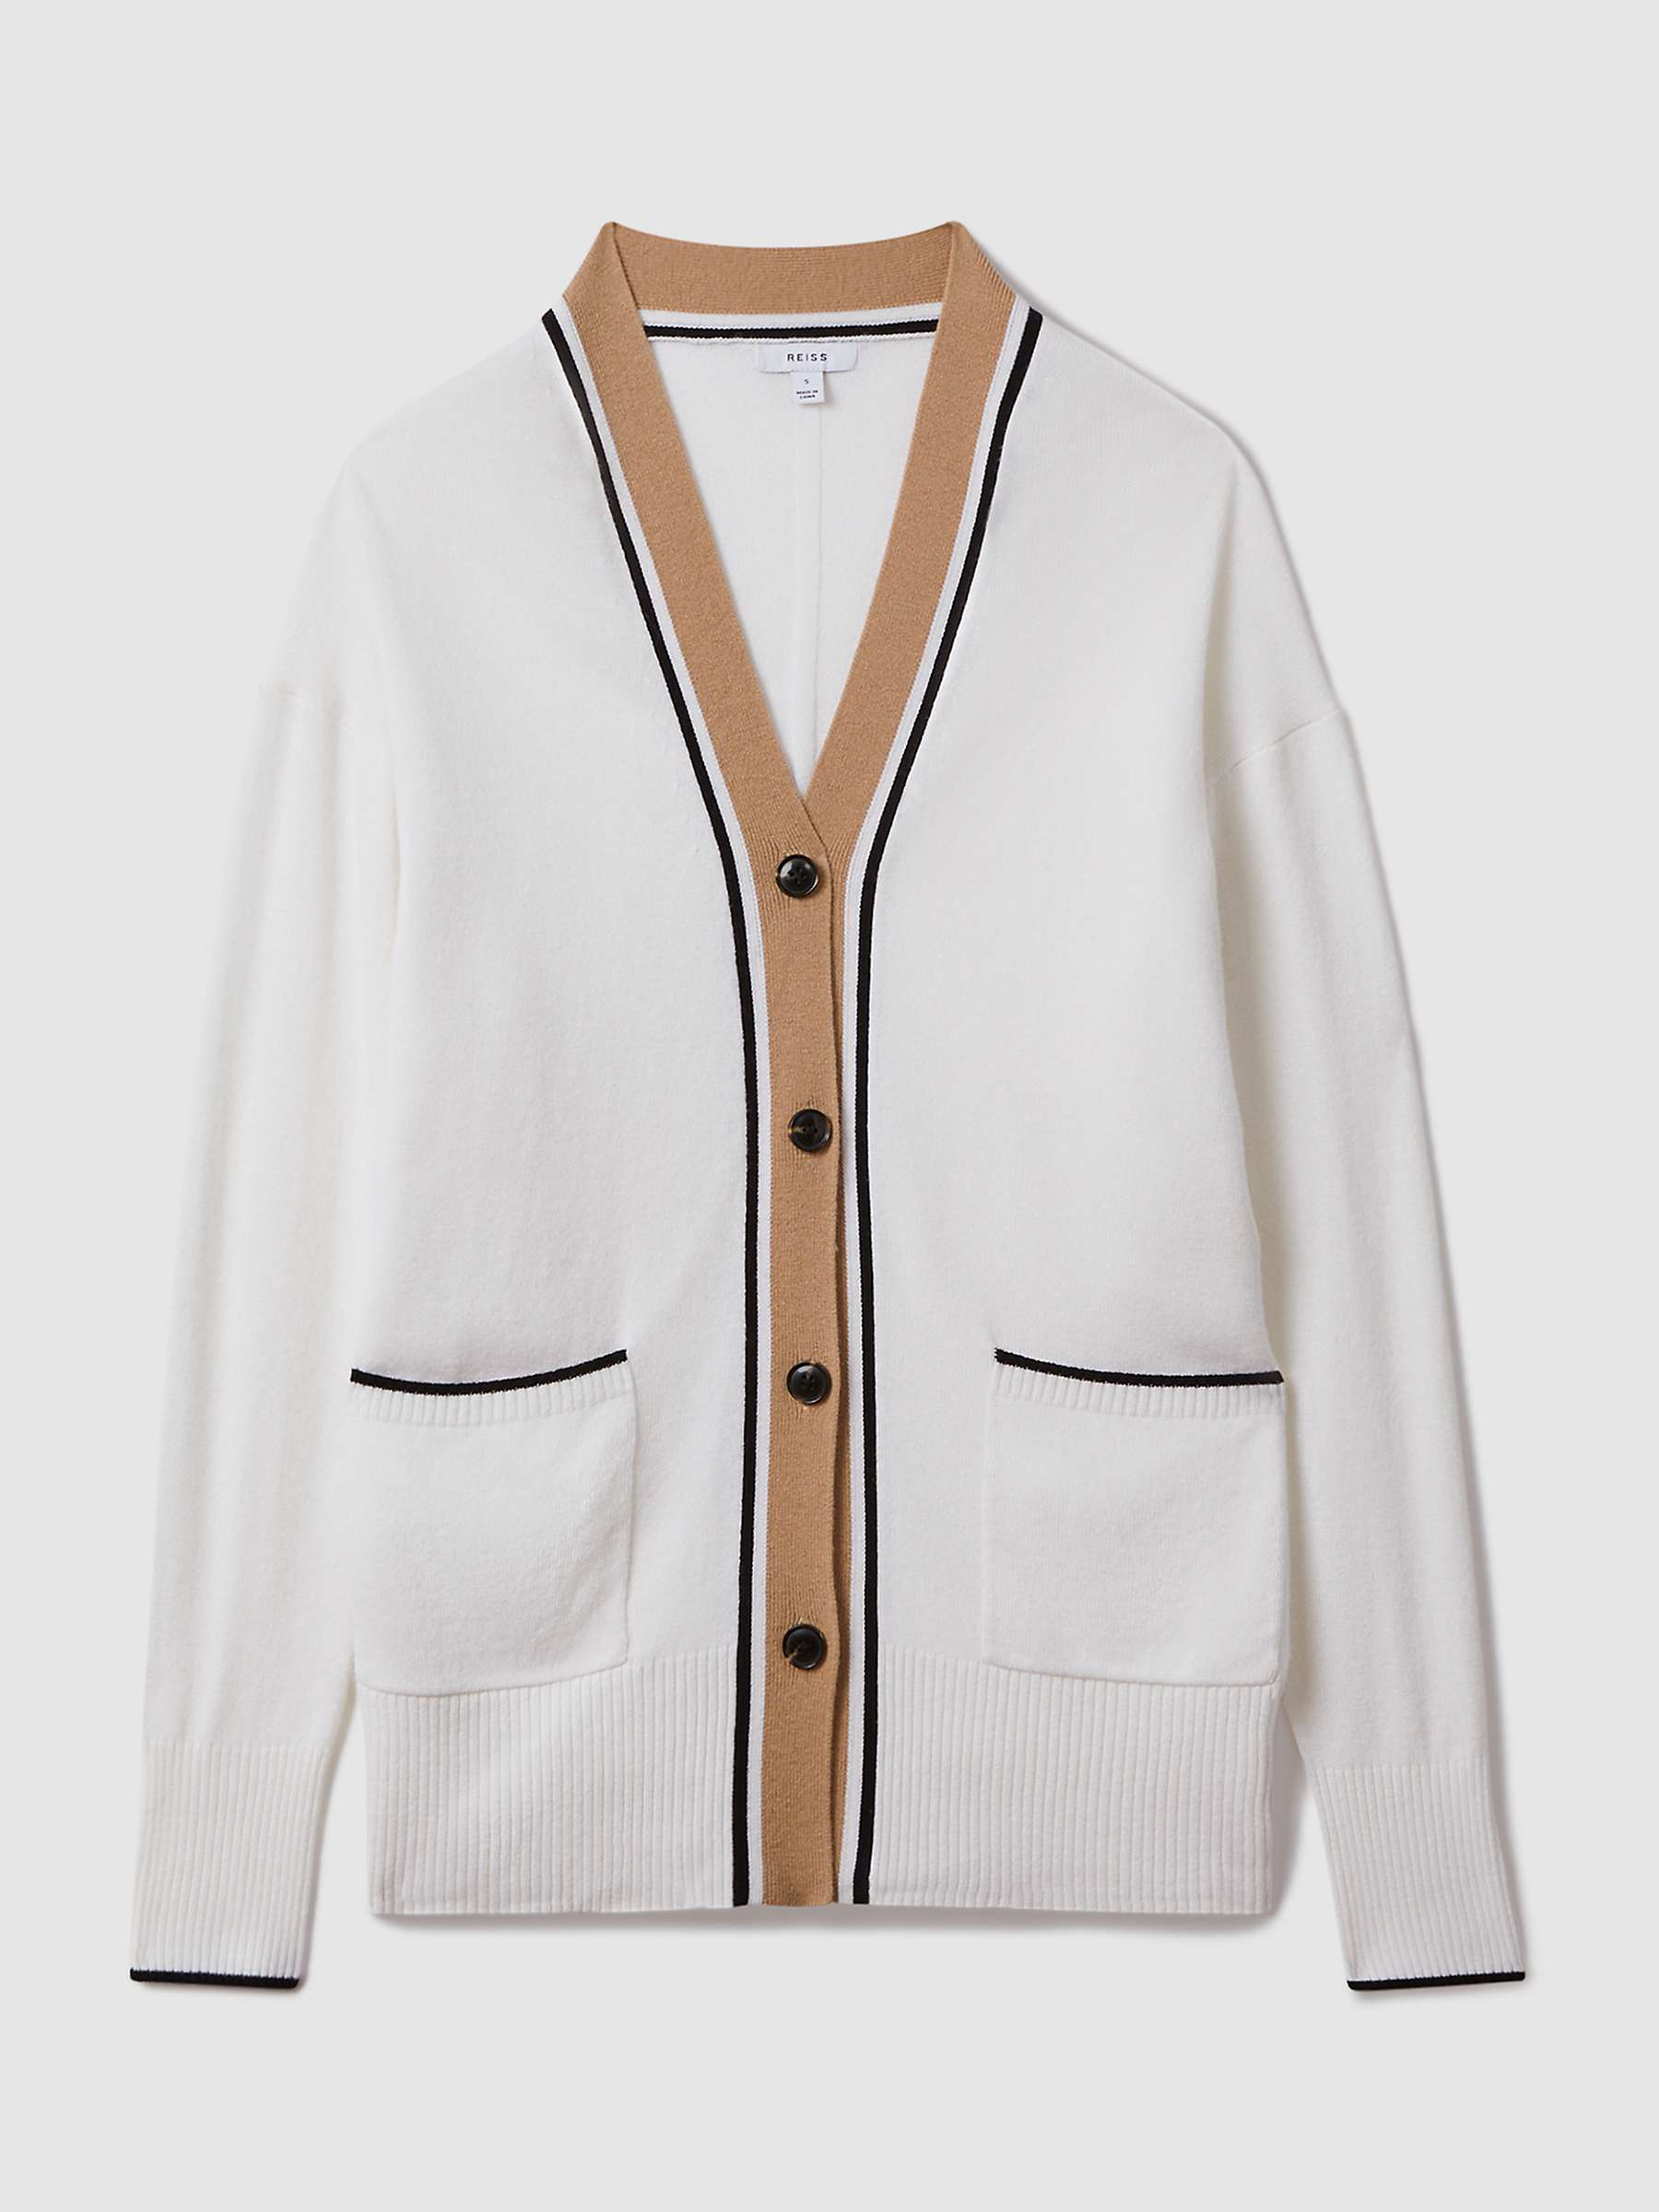 Buy Reiss Carly Cashmere Blend Cardigan, Ivory/Black Online at johnlewis.com